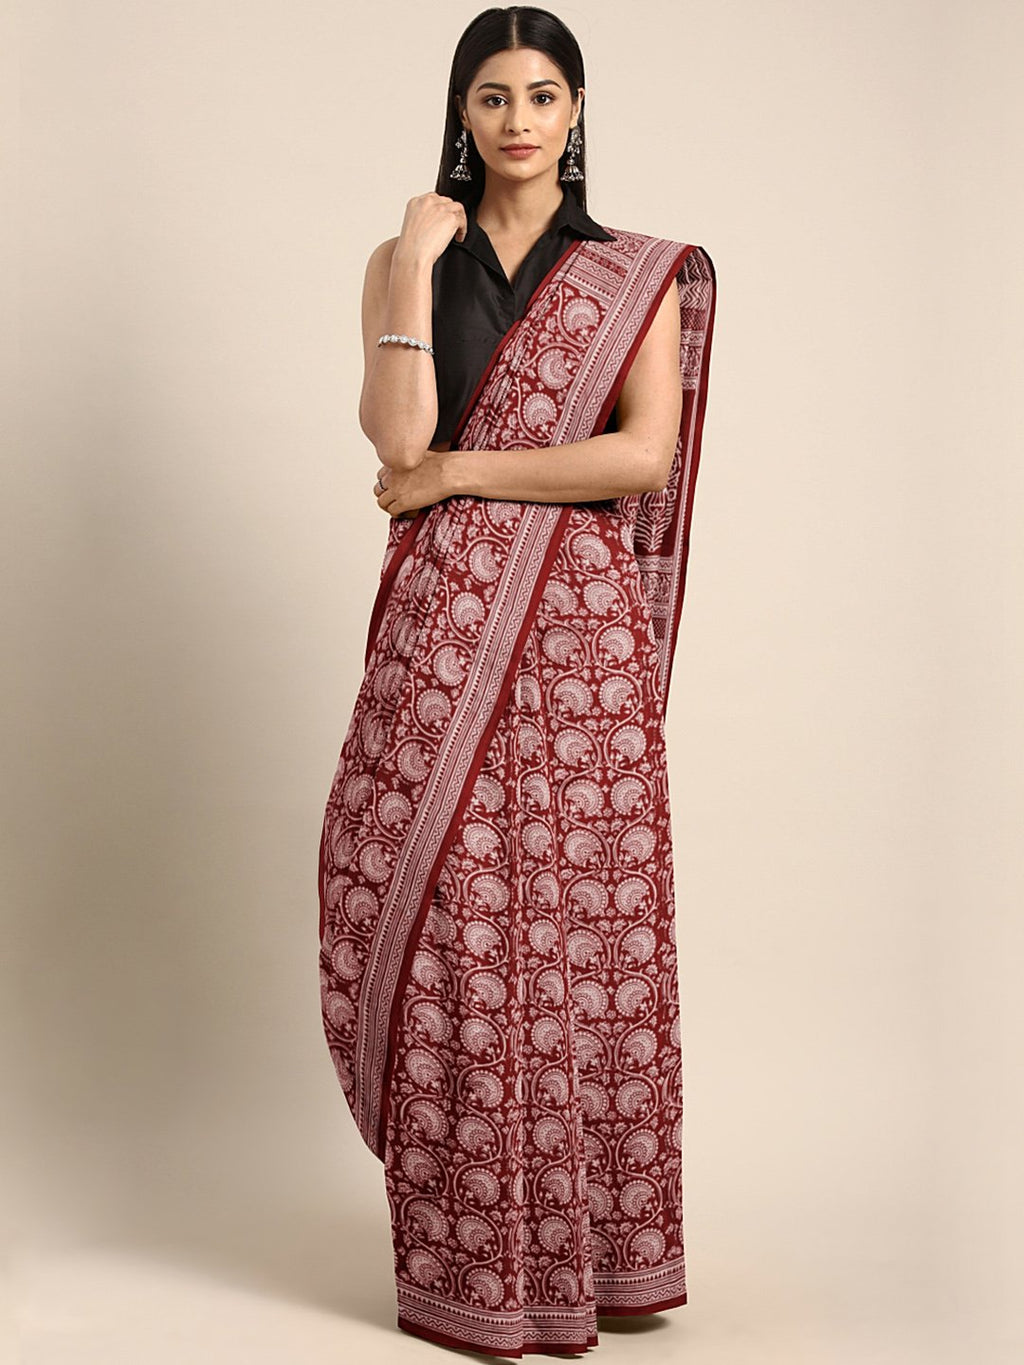 Maroon Off-White Handblock Print Bagh Saree-Saree-Kalakari India-MRBASA0008-Bagh, Cotton, Geographical Indication, Hand Blocks, Hand Crafted, Heritage Prints, Natural Dyes, Sarees, Sustainable Fabrics-[Linen,Ethnic,wear,Fashionista,Handloom,Handicraft,Indigo,blockprint,block,print,Cotton,Chanderi,Blue, latest,classy,party,bollywood,trendy,summer,style,traditional,formal,elegant,unique,style,hand,block,print, dabu,booti,gift,present,glamorous,affordable,collectible,Sari,Saree,printed, holi, Diwal